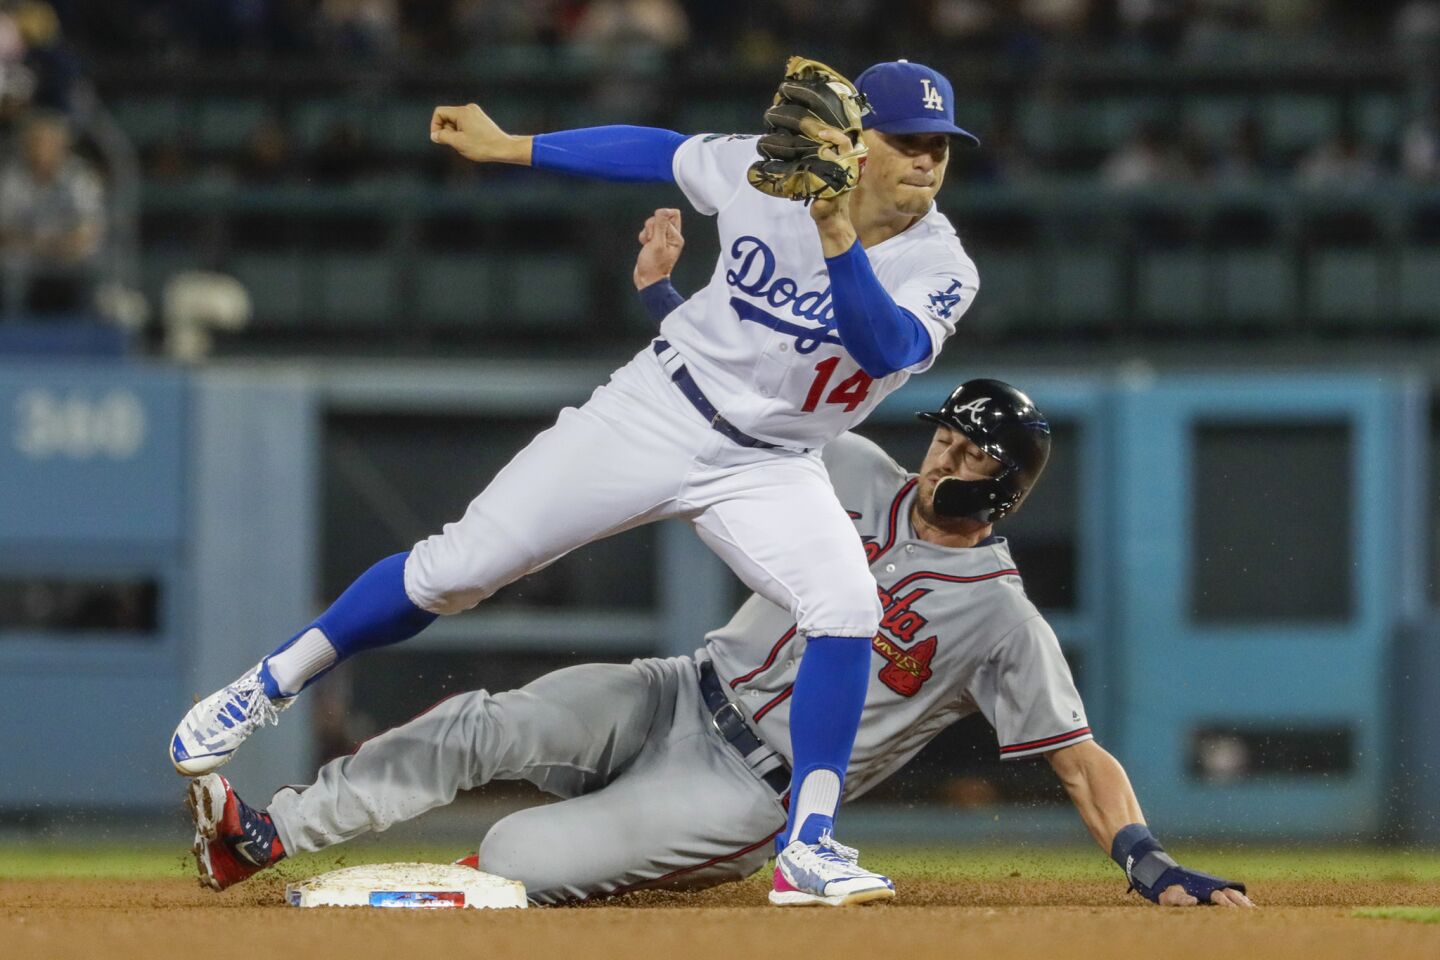 Braves baserunner Lane Adams is out on a force play as Dodgers second baseman Kike Hernandez receives the ball from third baseman Justin Turner.